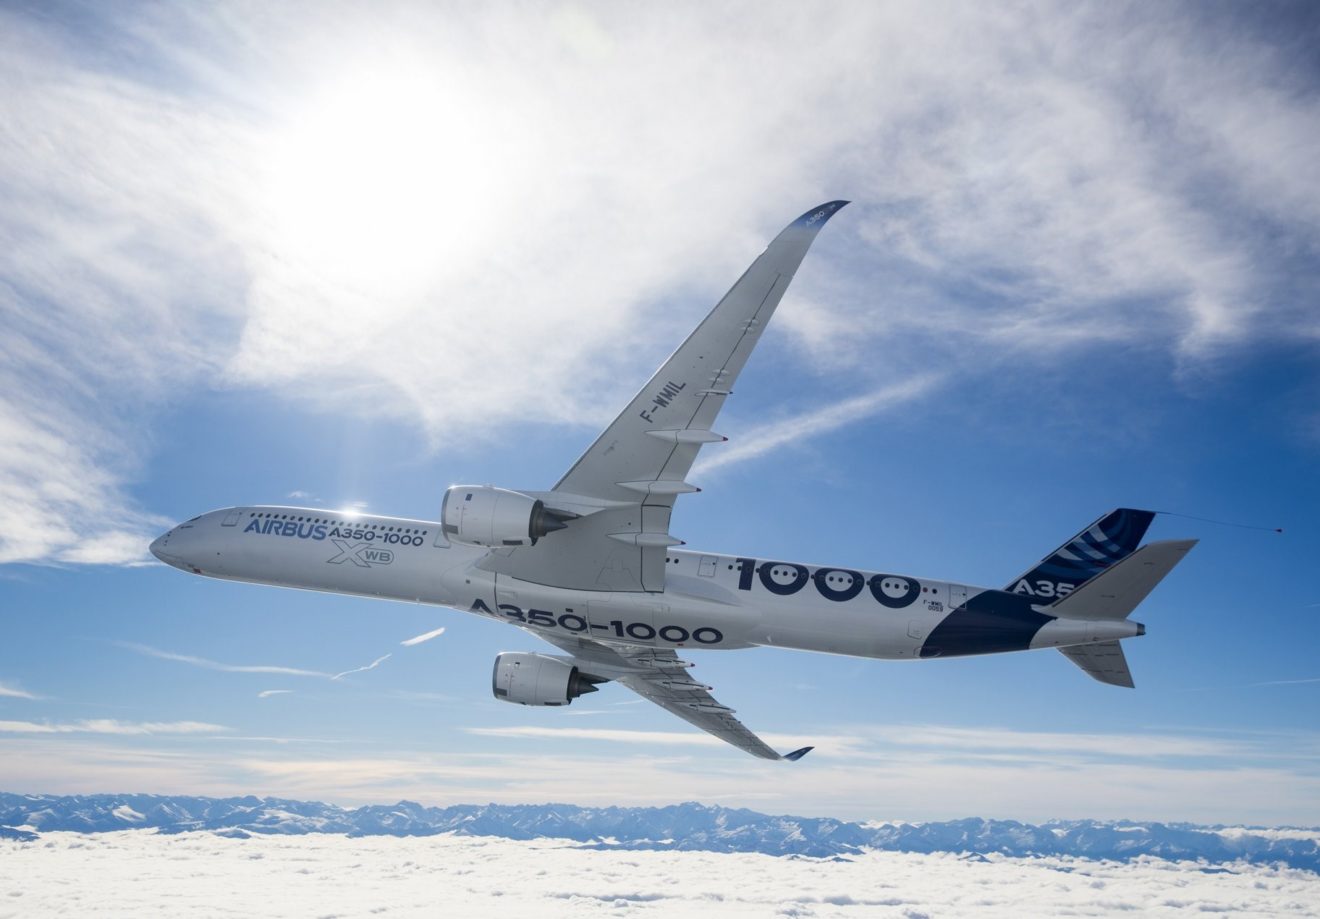 PAL has selected the Airbus A350-1000 aircraft under the carrier’s Ultra-Long-Haul-Fleet project